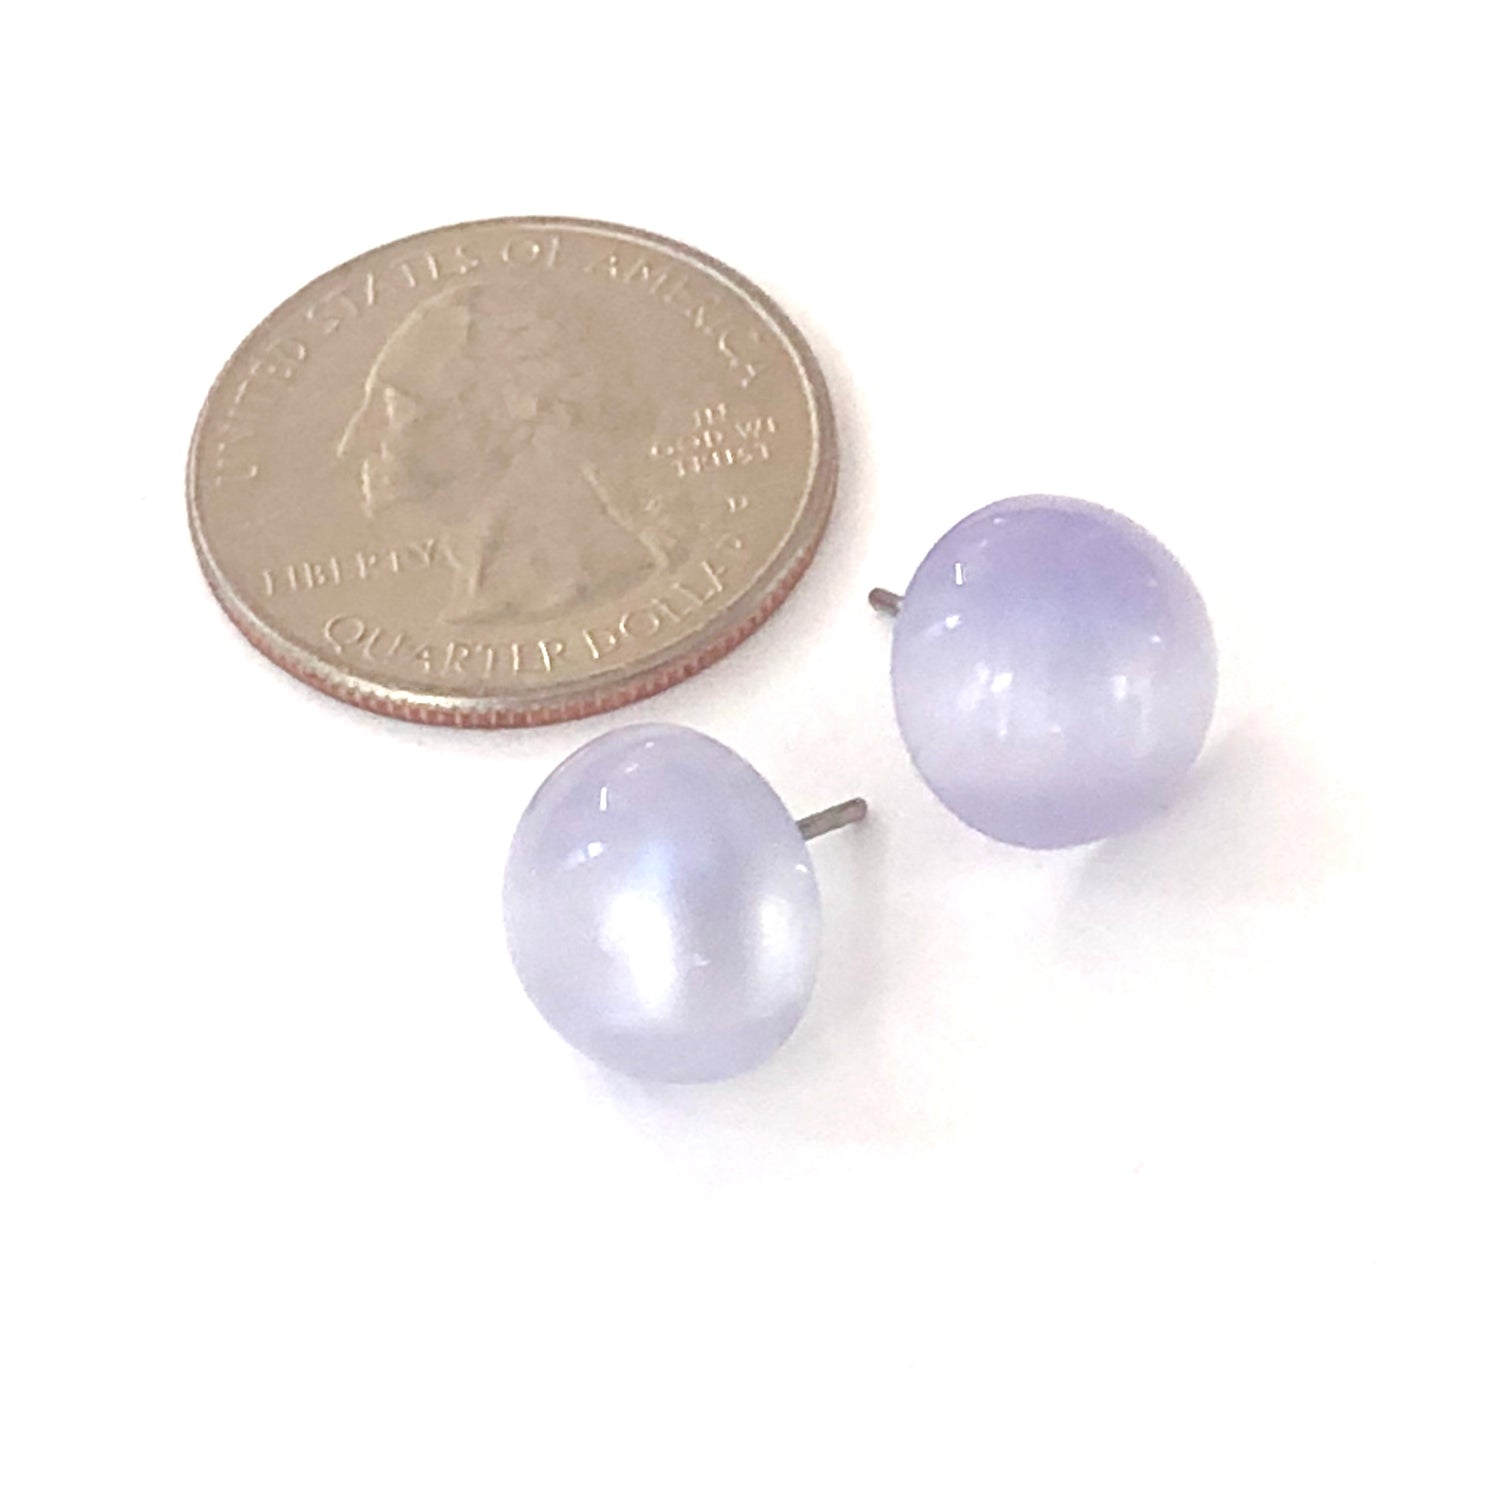 Lavender Moonglow Retro Button Studs Earrings